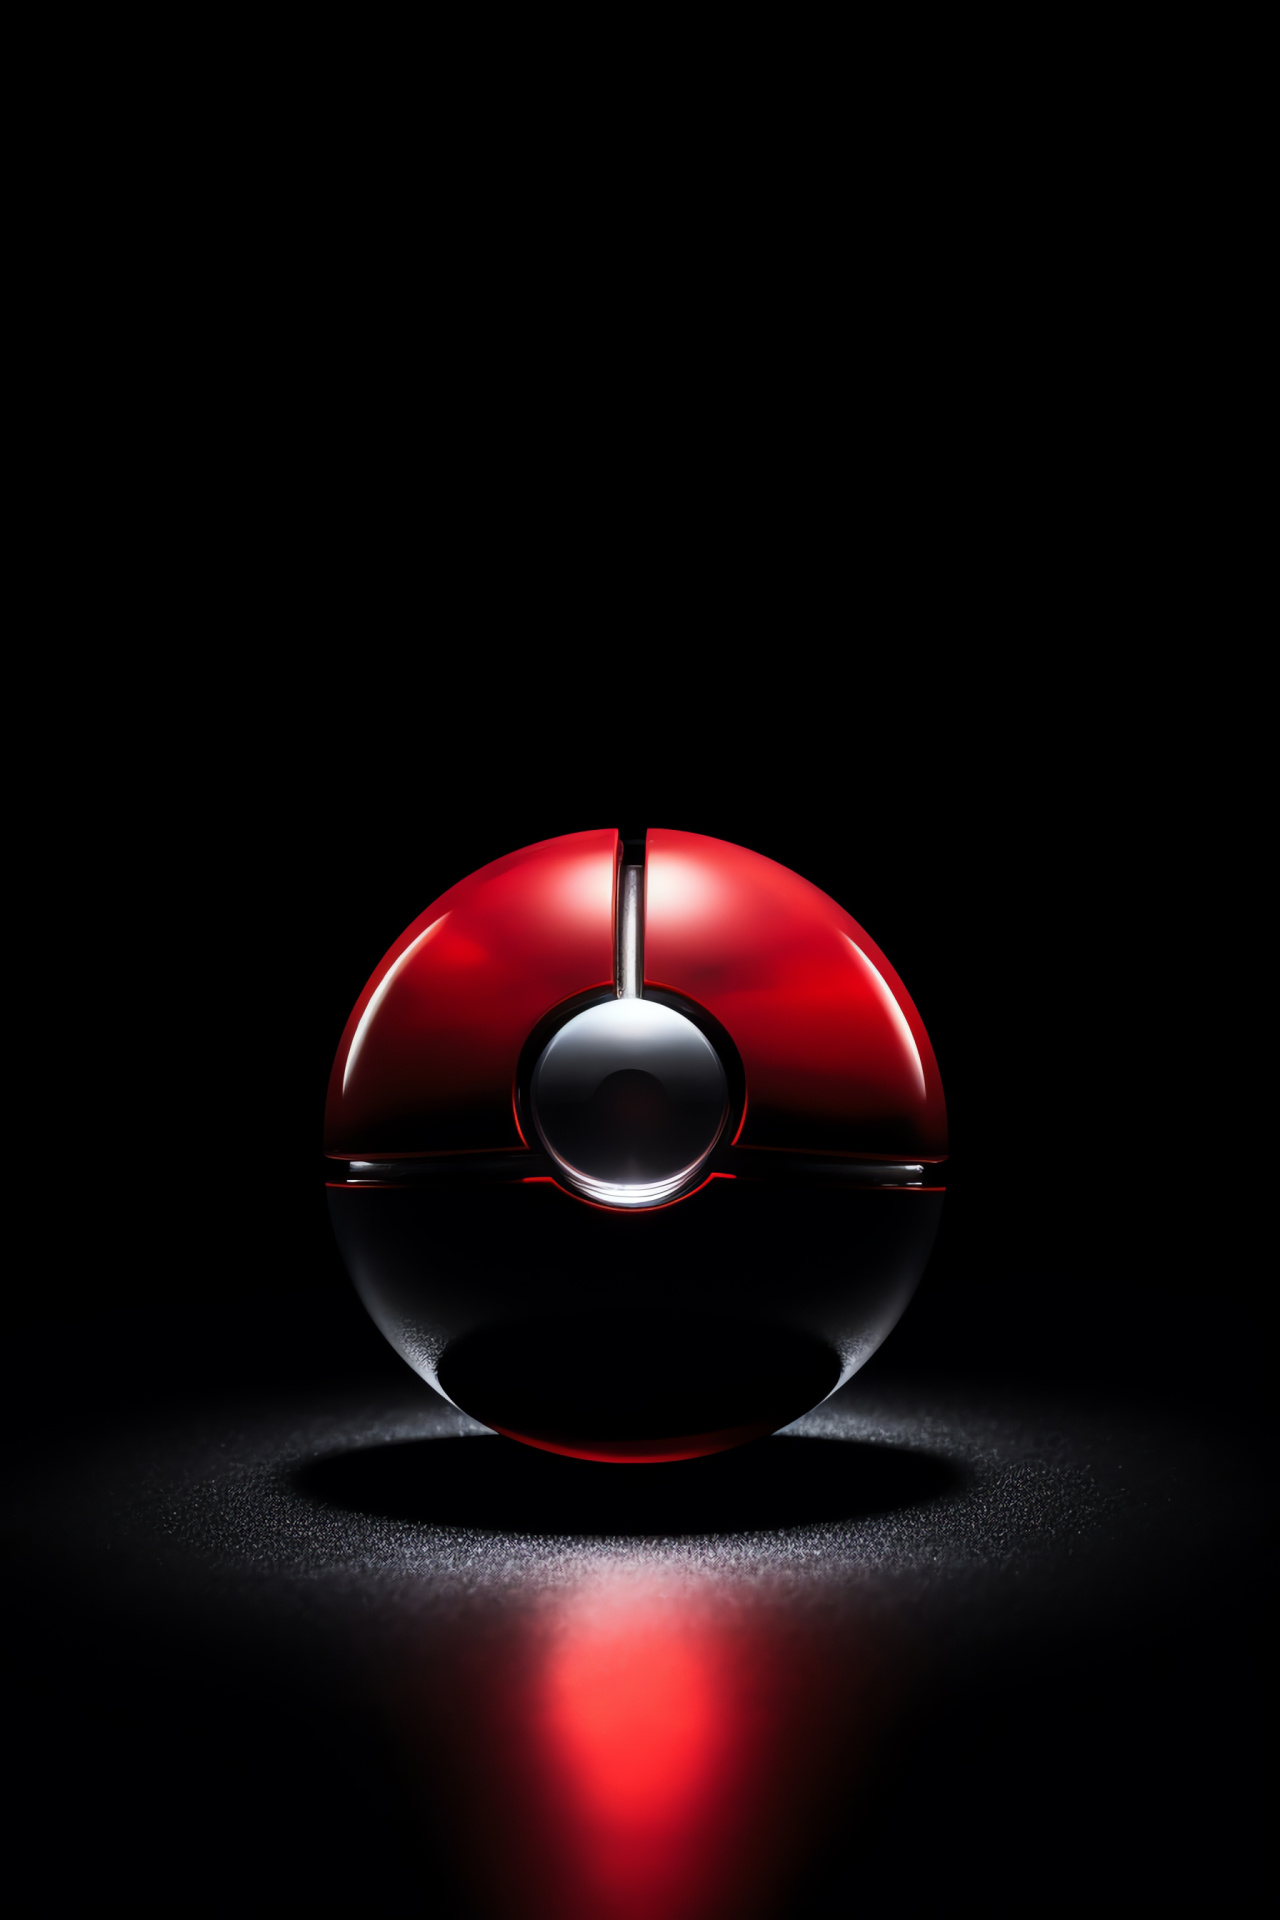 Pokball accessory, Crimson sphere design, Gaming icon, Pocket monsters container, Trainer's equipment, HD Phone Image